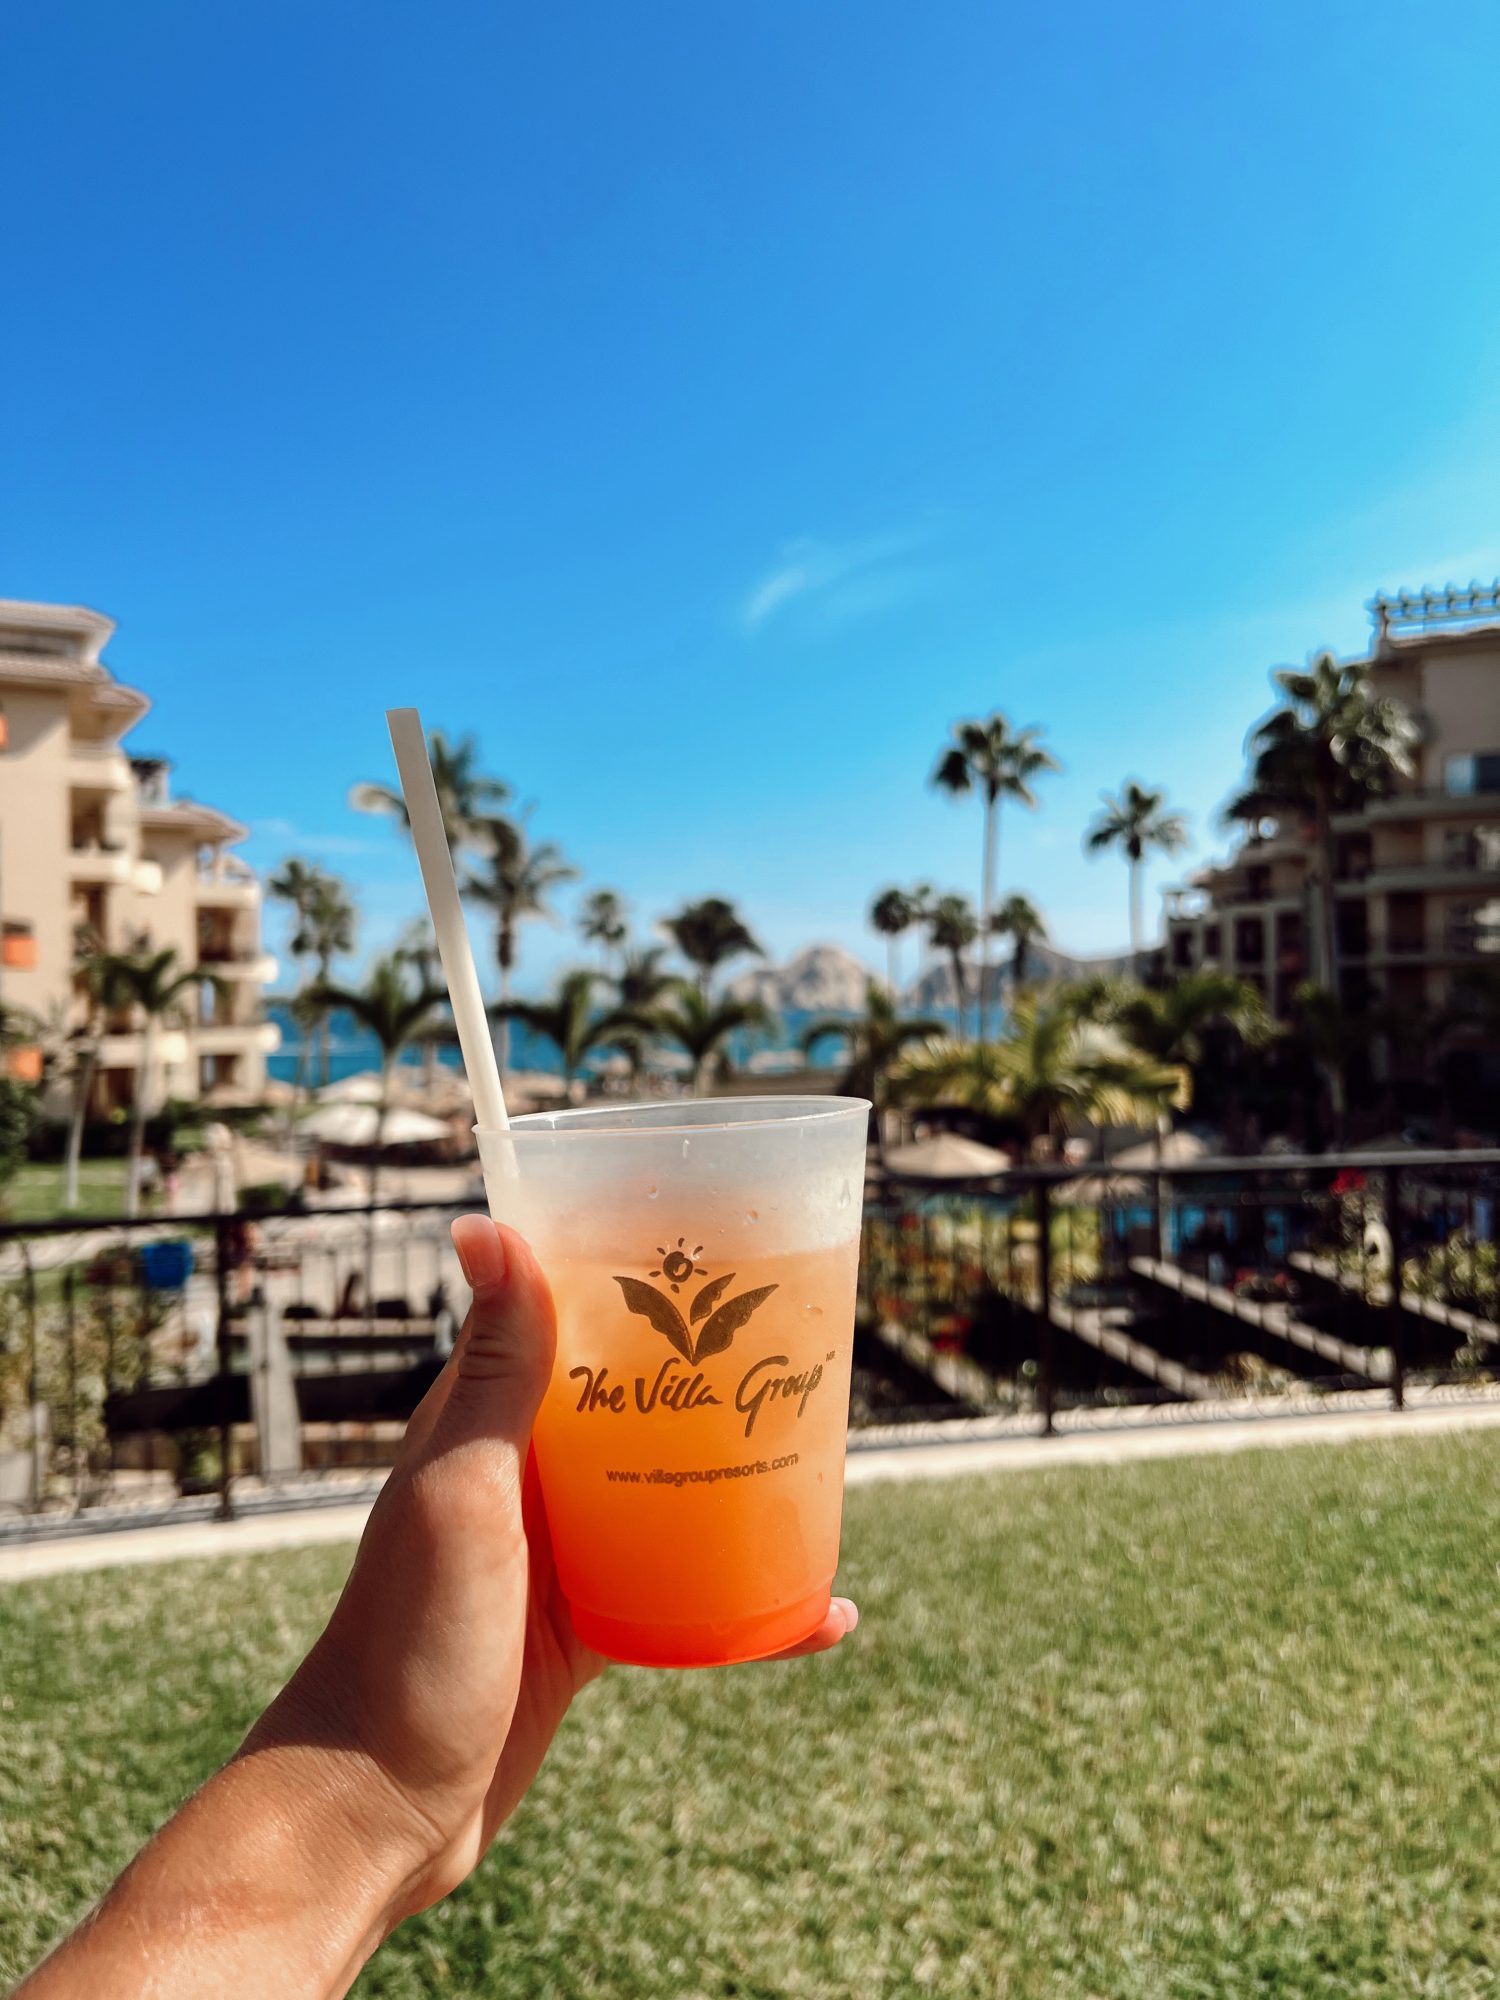 hand holding a cup of Mai Tai drink with palm trees in the background.